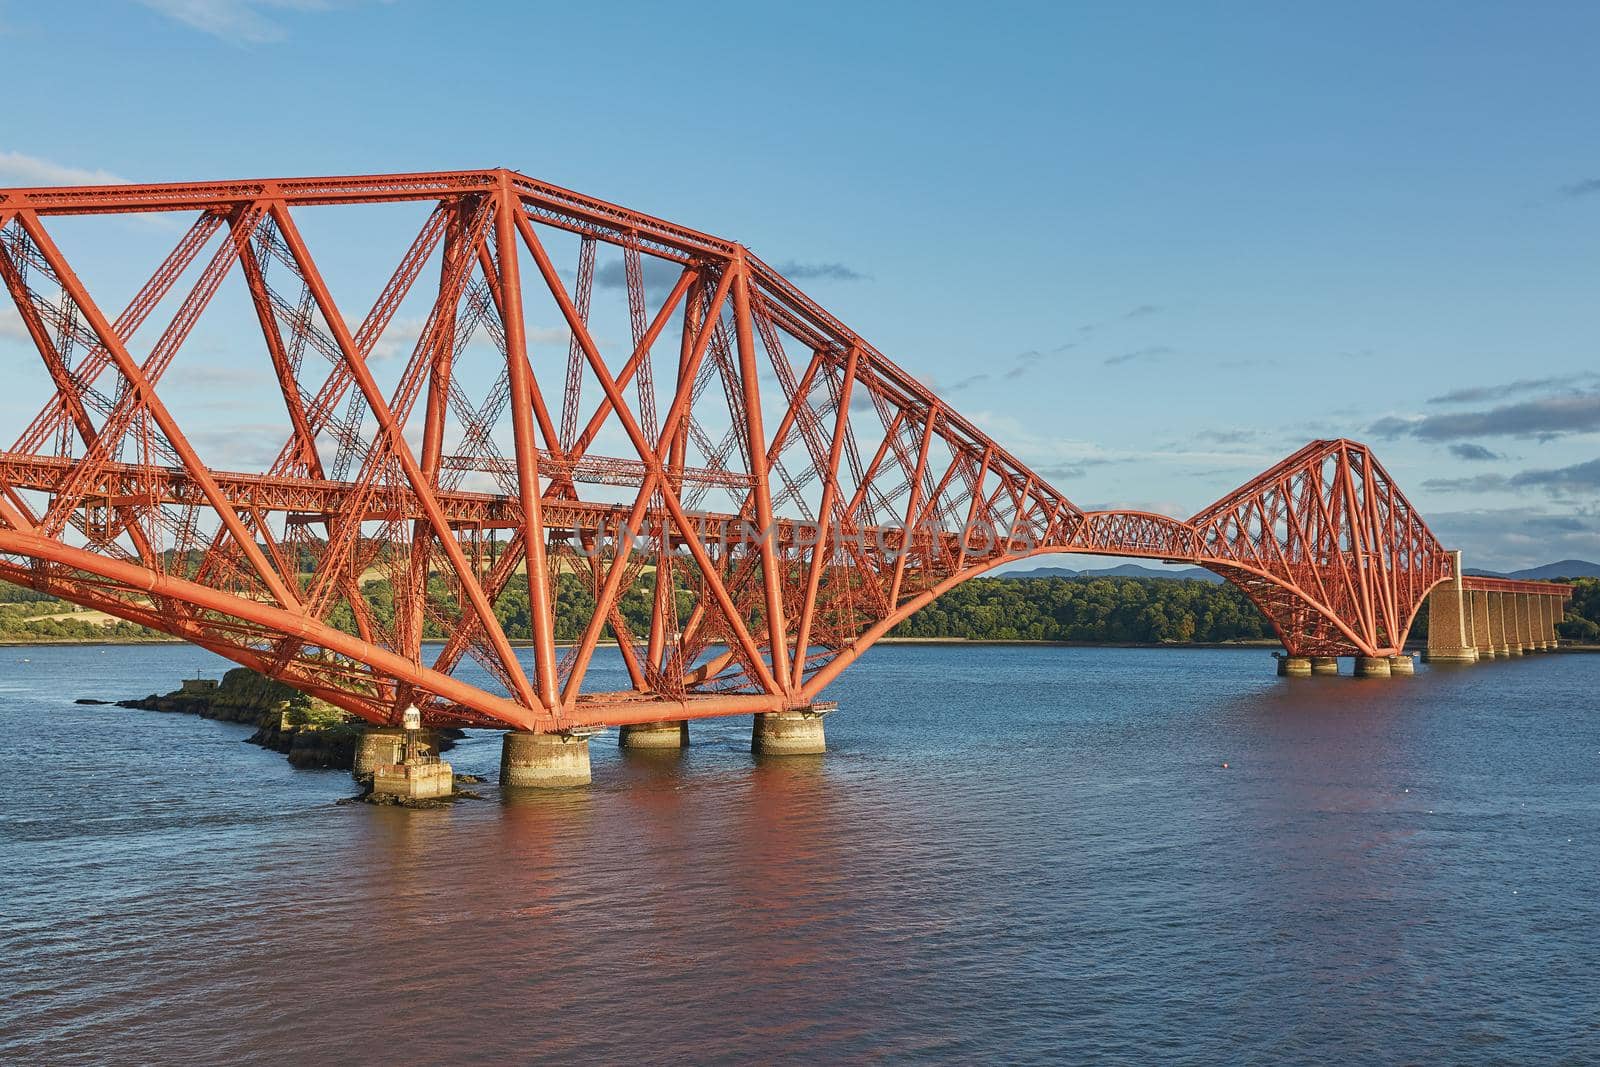 The Forth Rail Bridge, Scotland, connecting South Queensferry (Edinburgh) with North Queensferry (Fife). by wondry